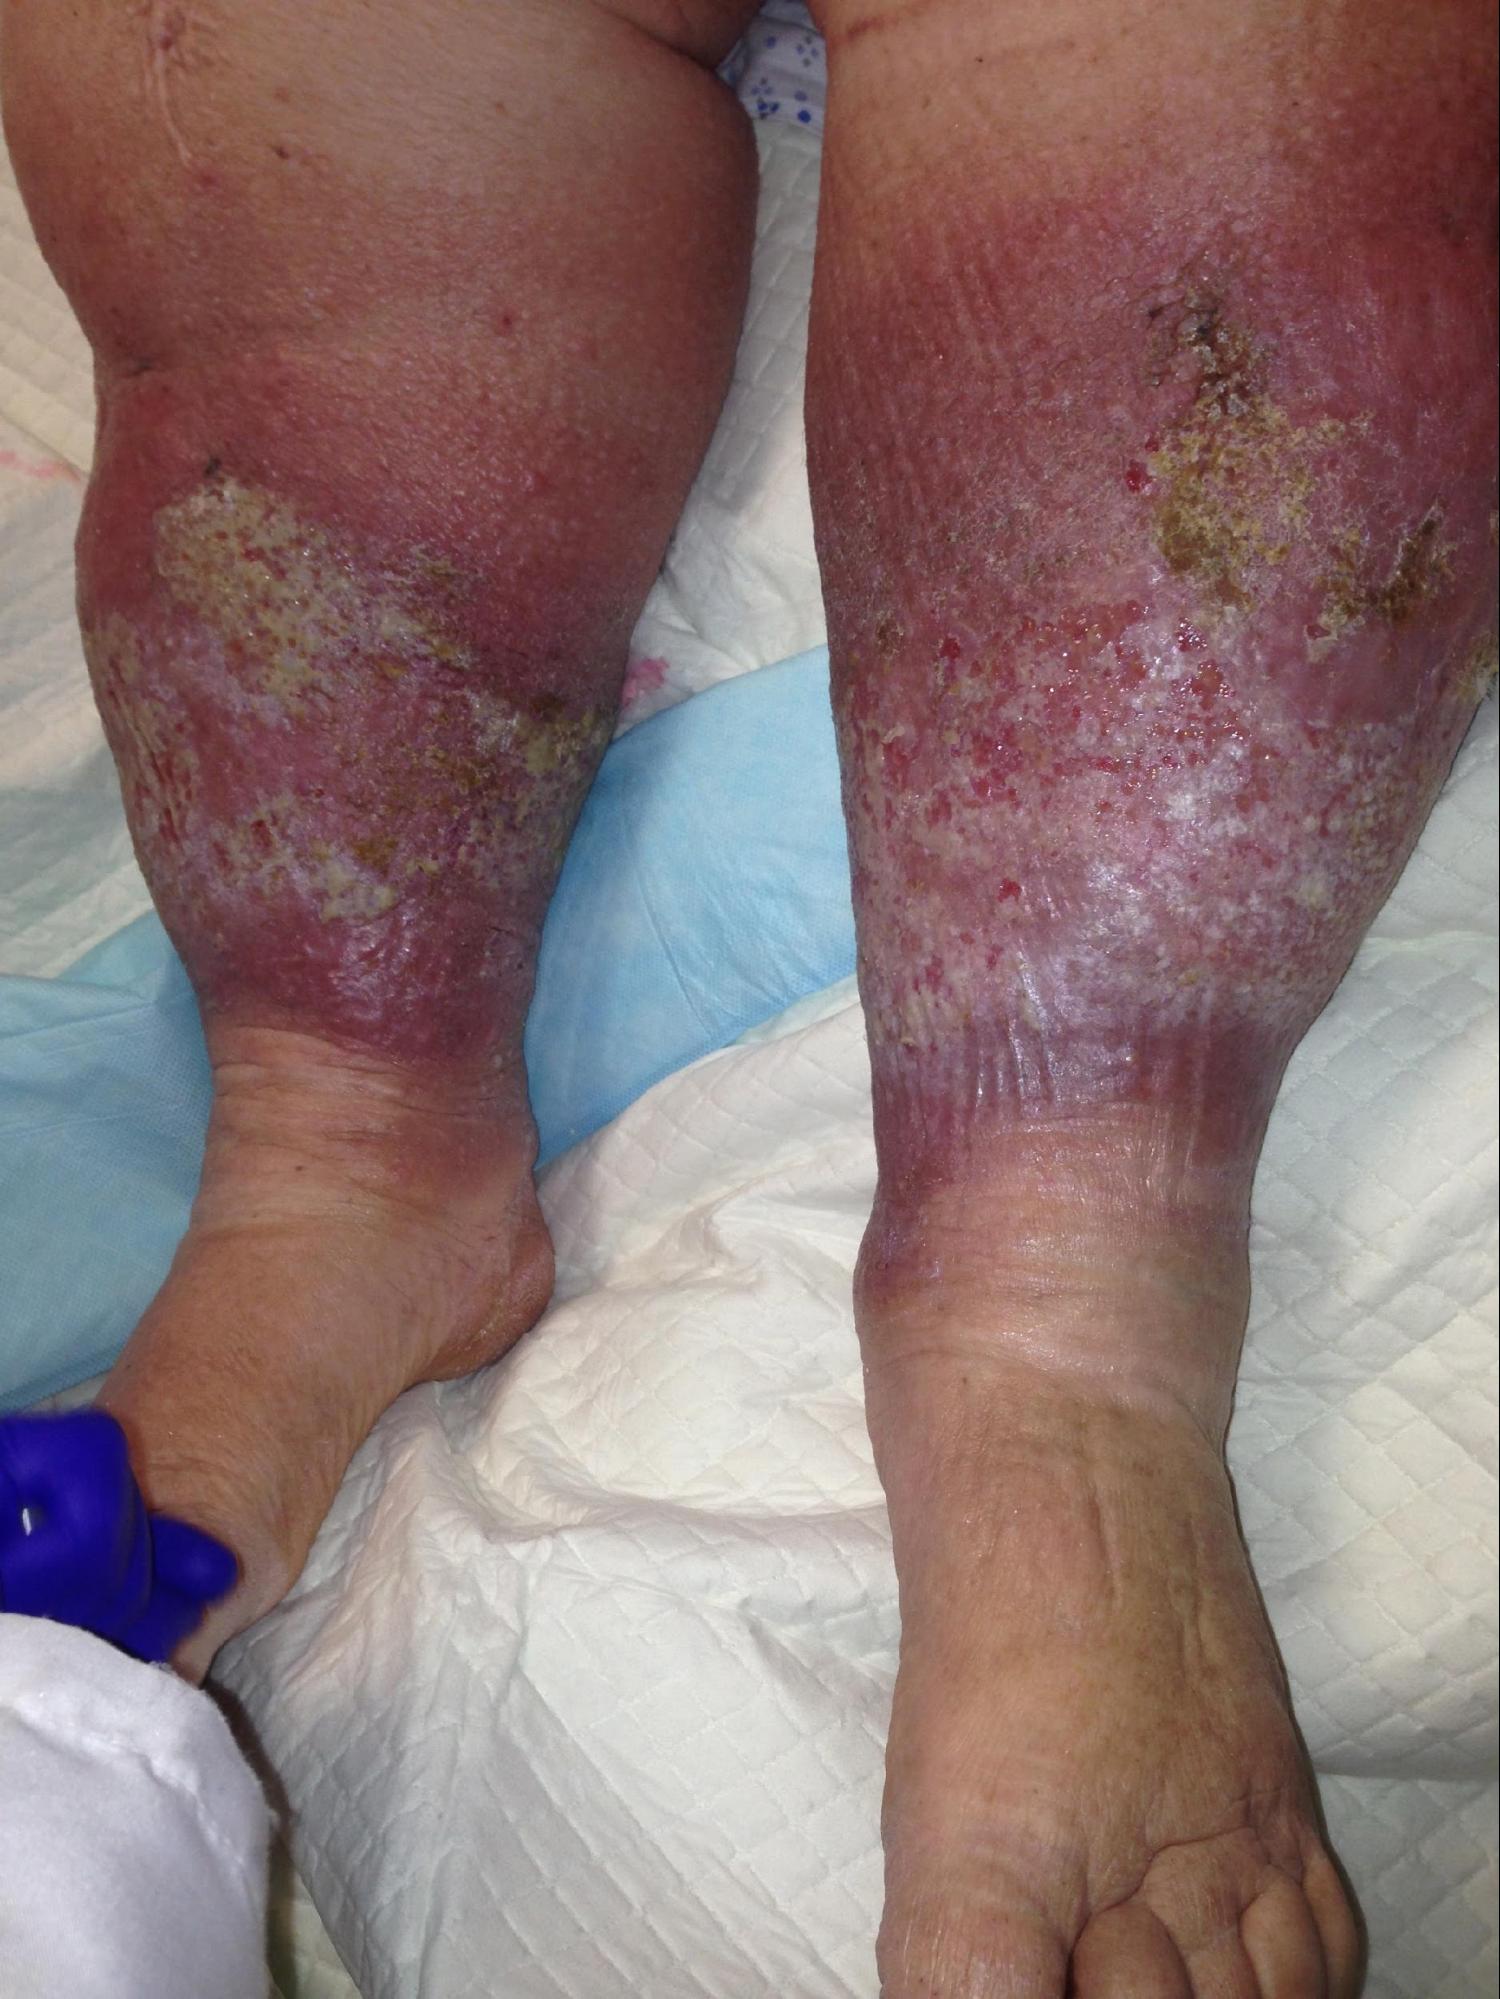 Venous Insufficiency 
Note the rubor (not cellulitis), atrophie blanche, and lipodermatosclerosis. 